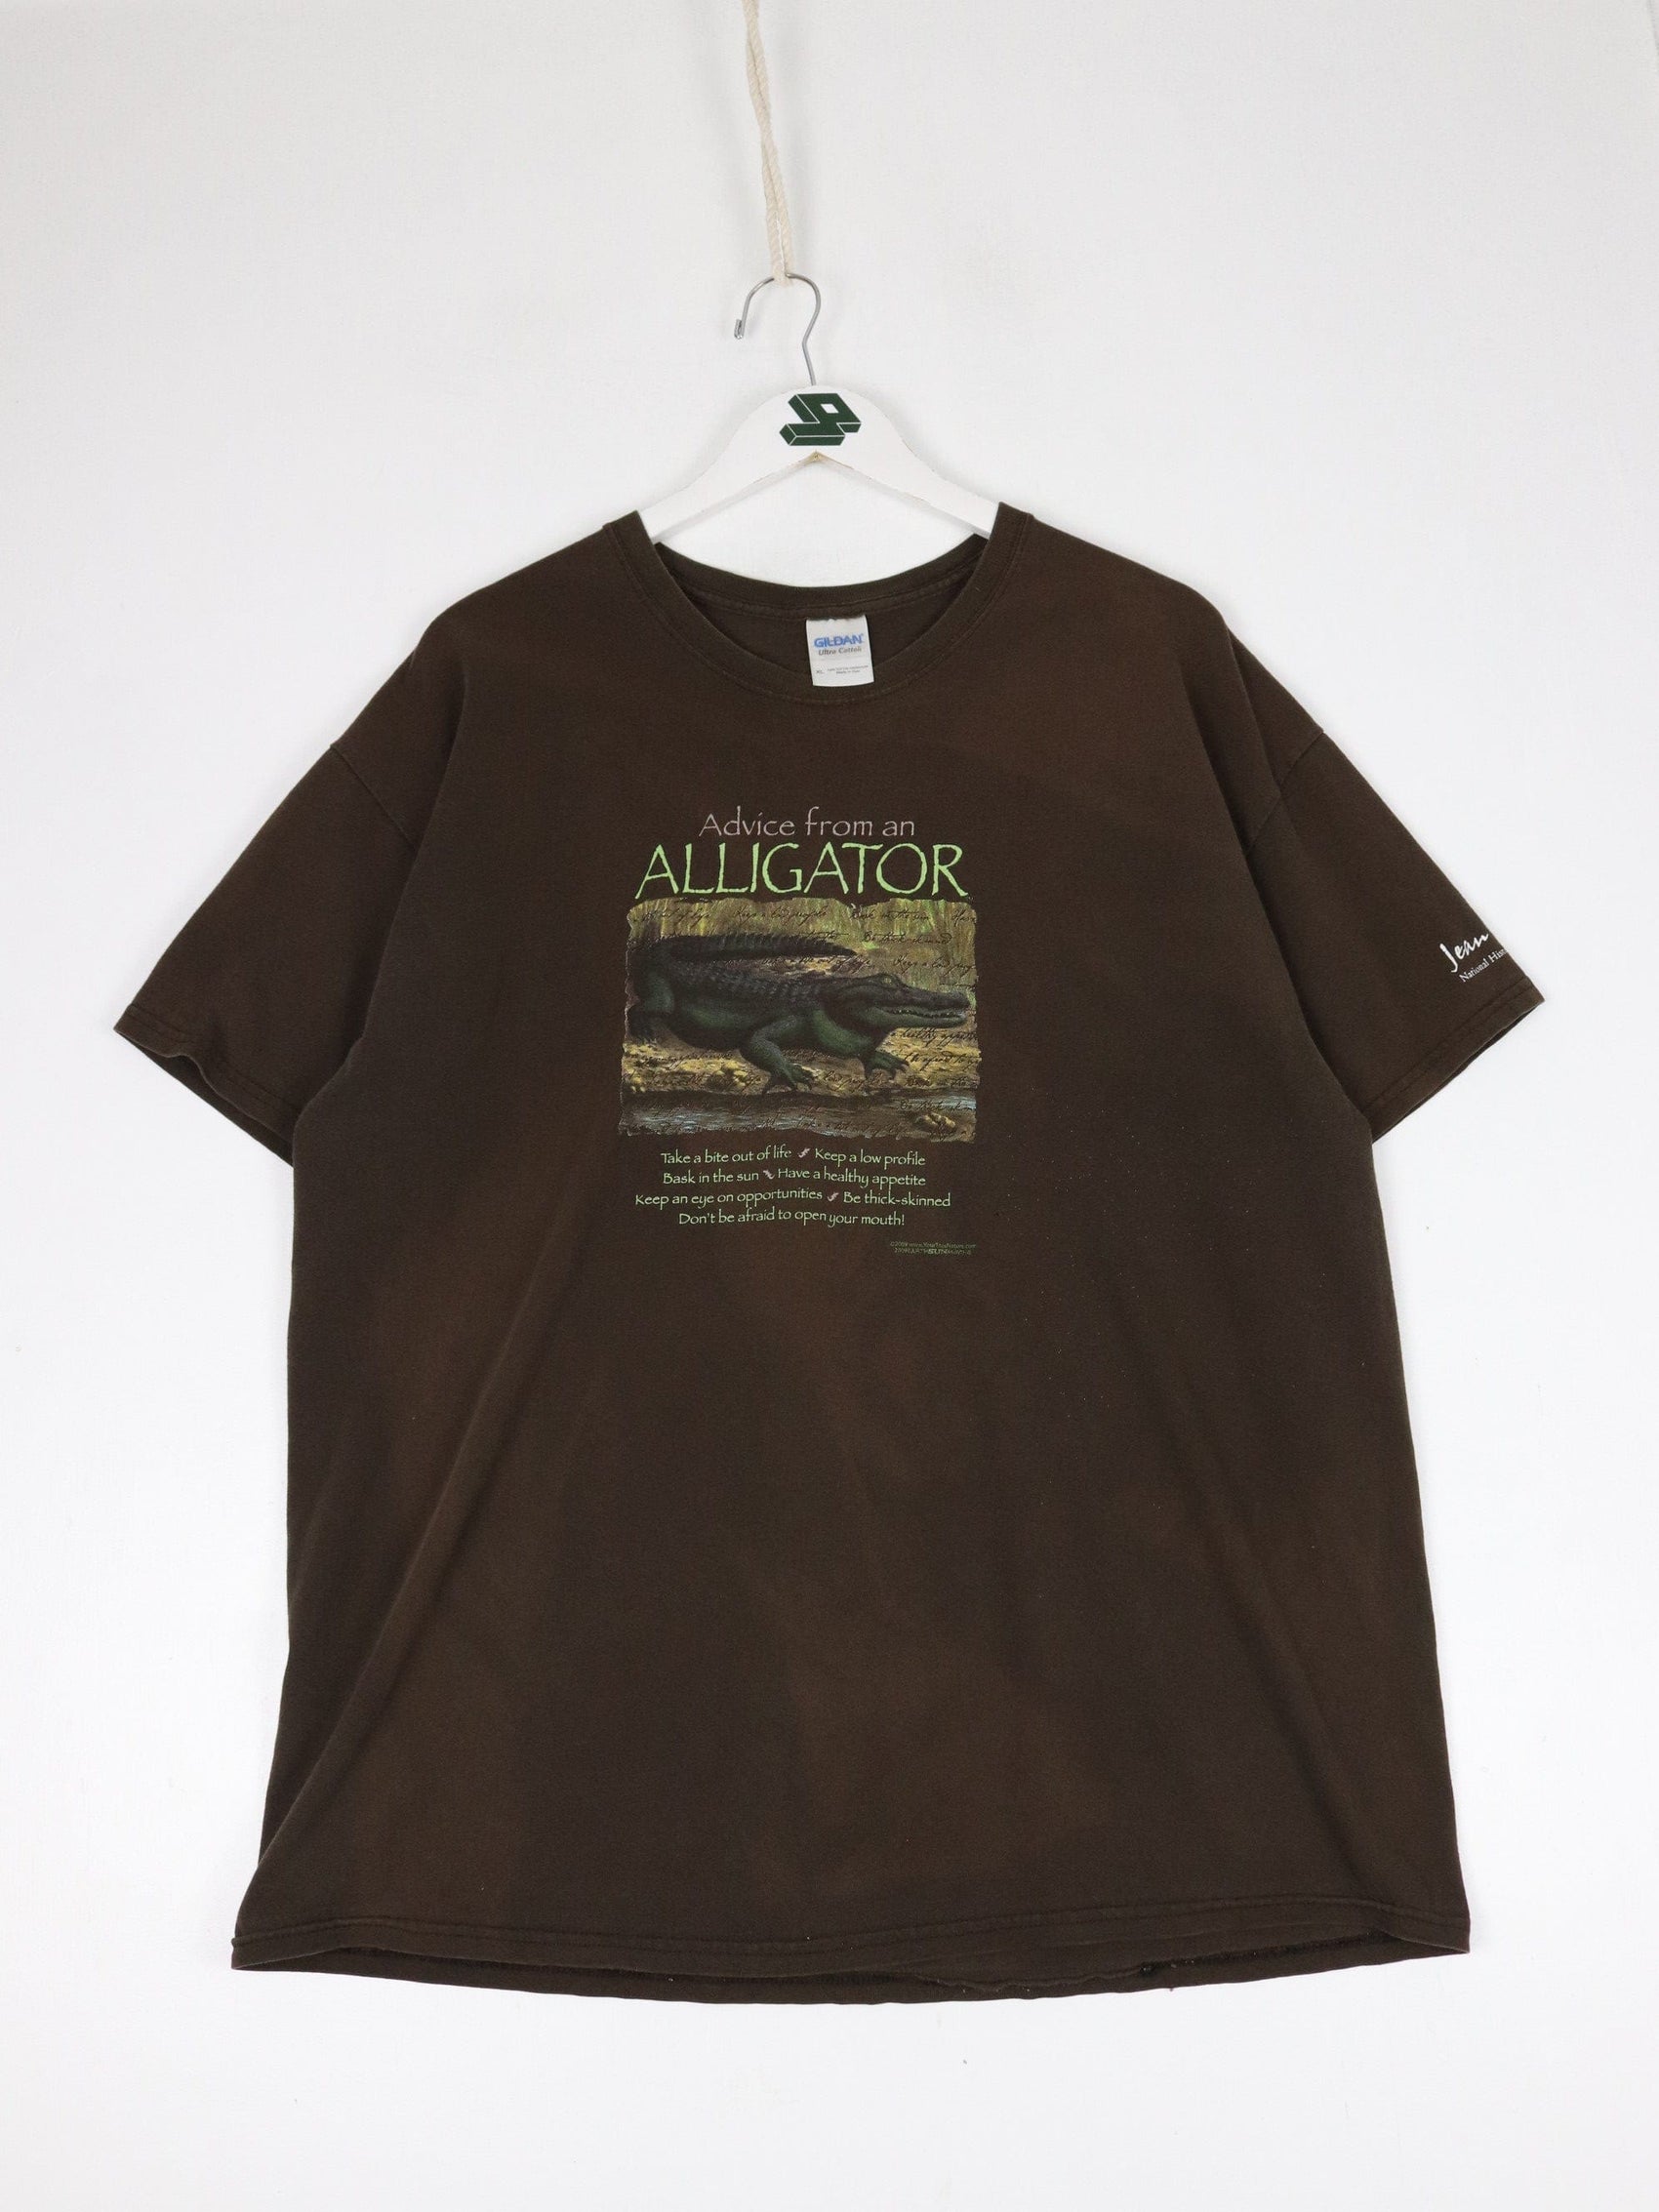 Other T-Shirts & Tank Tops Advice from an Alligator T Shirt Mens XL Brown